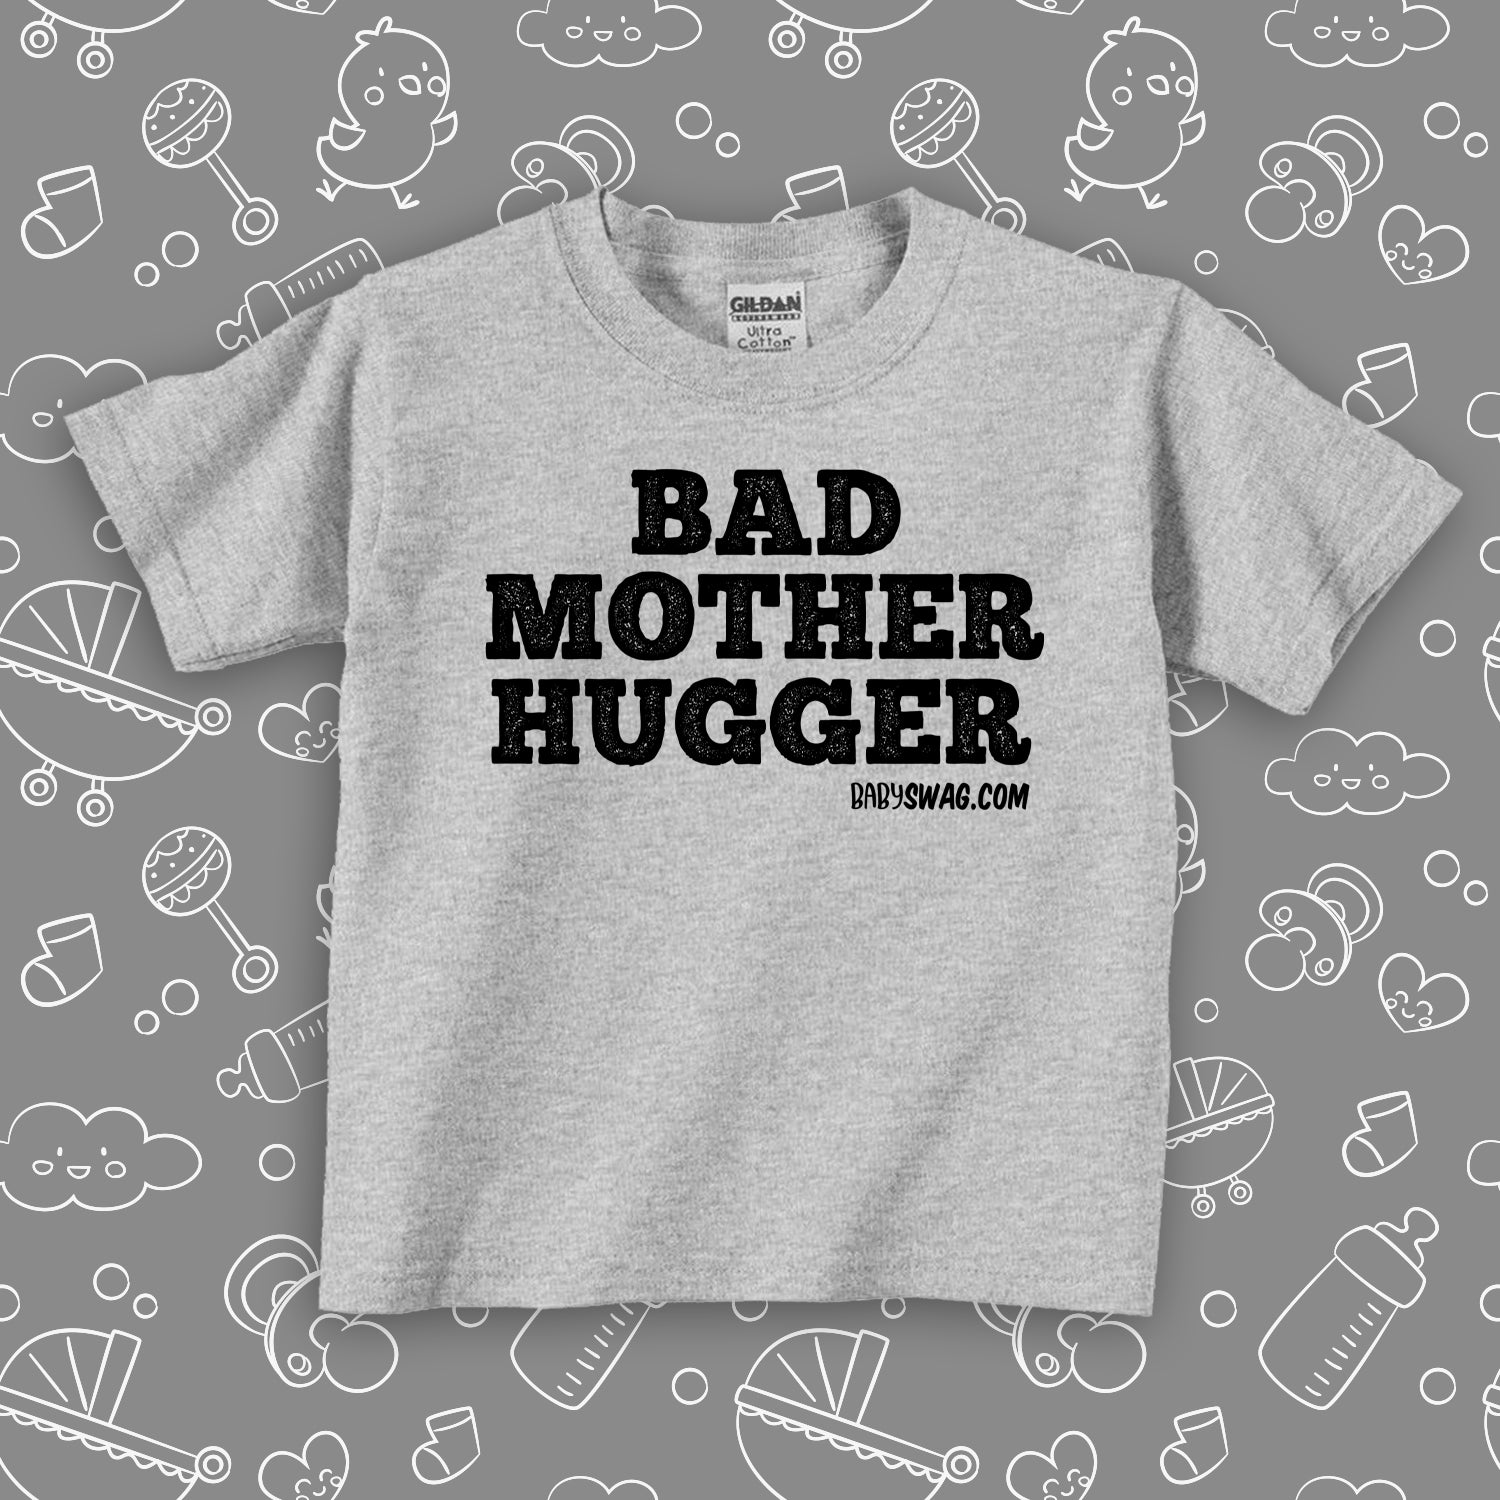 Funny toddler shirts with saying "Bad Mother Hugger" in grey. 